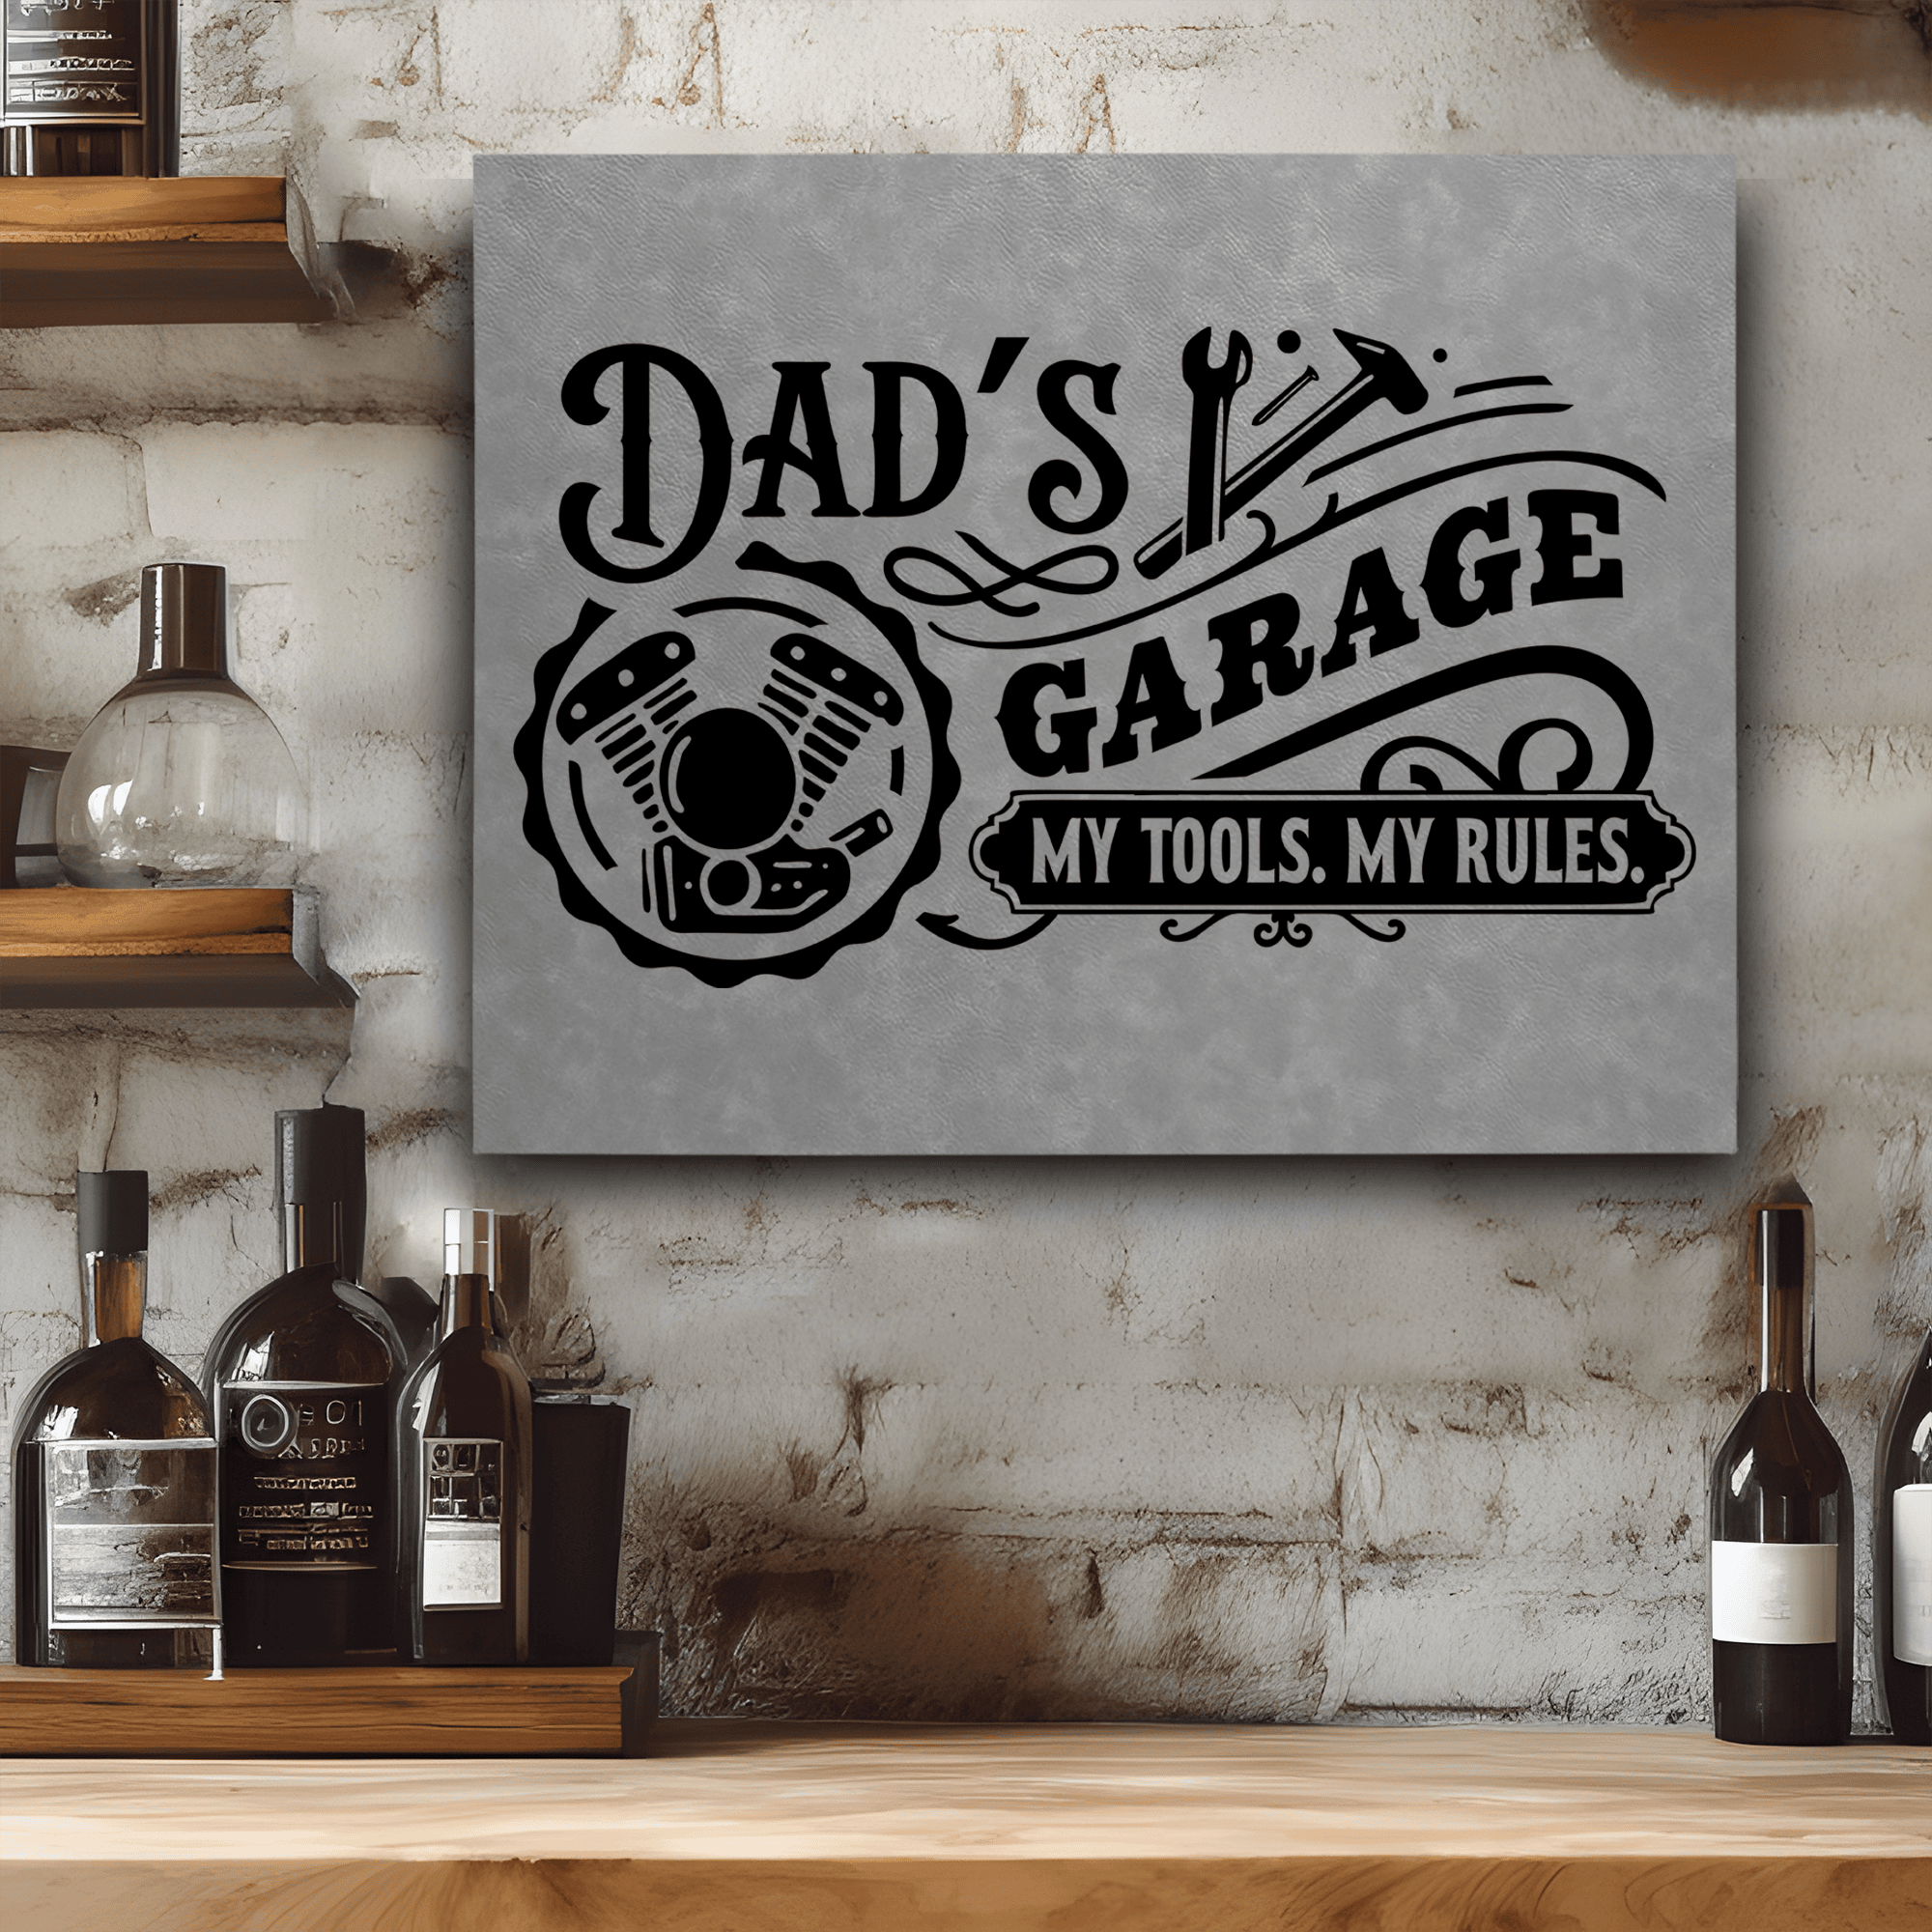 Grey Leather Wall Decor With Dads Garage Rules Design